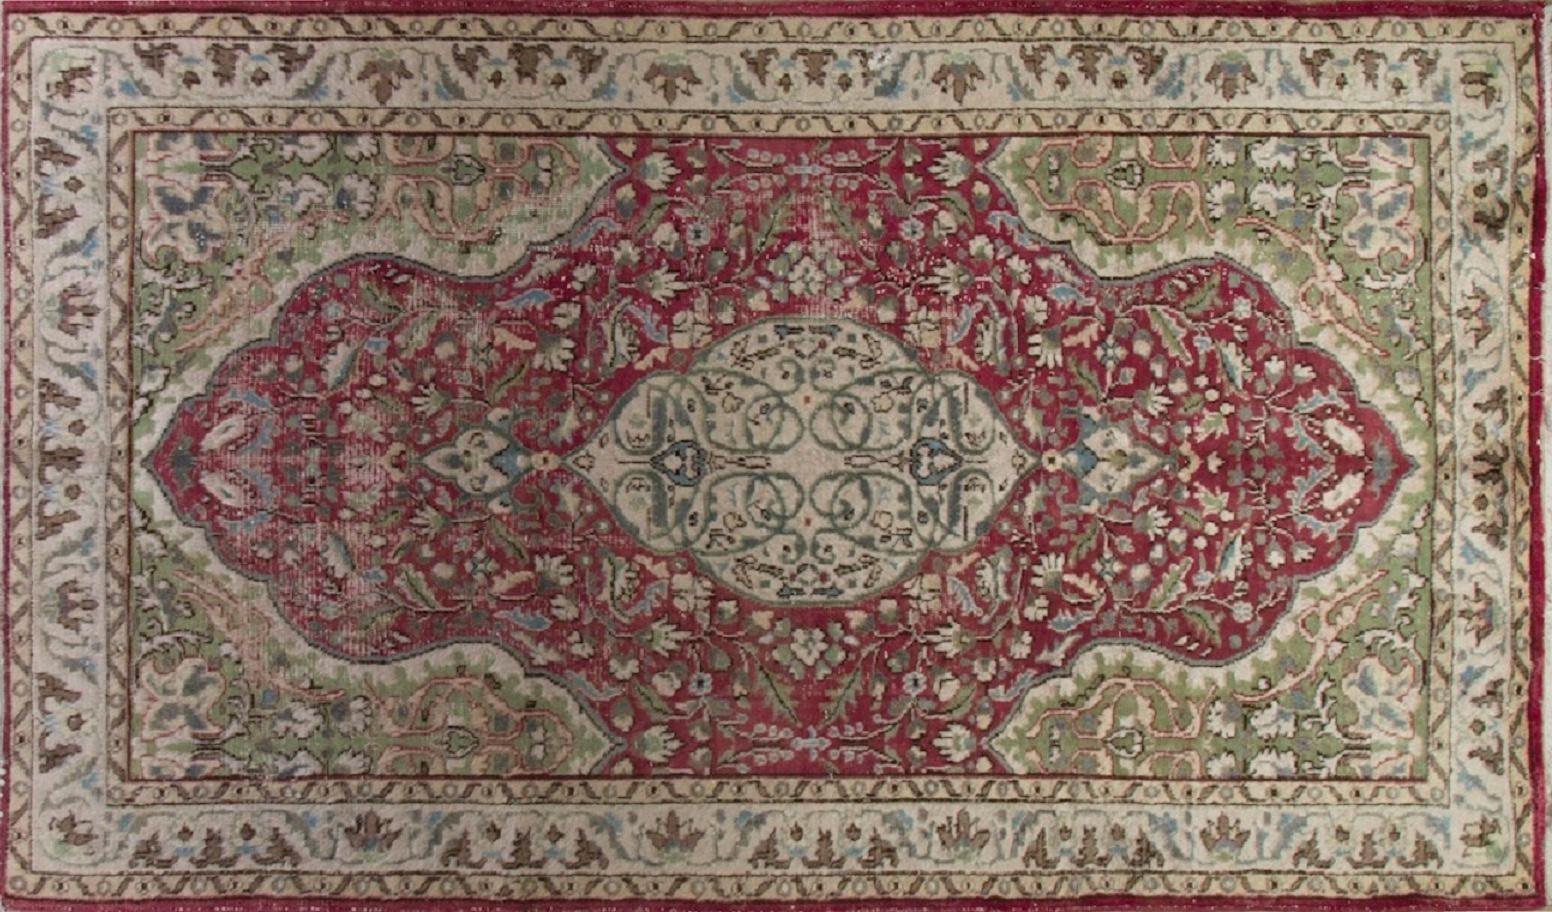 5.6x9.4 Ft Vintage Handmade Wool Turkish Rug in Burgundy & Green In Good Condition For Sale In Philadelphia, PA